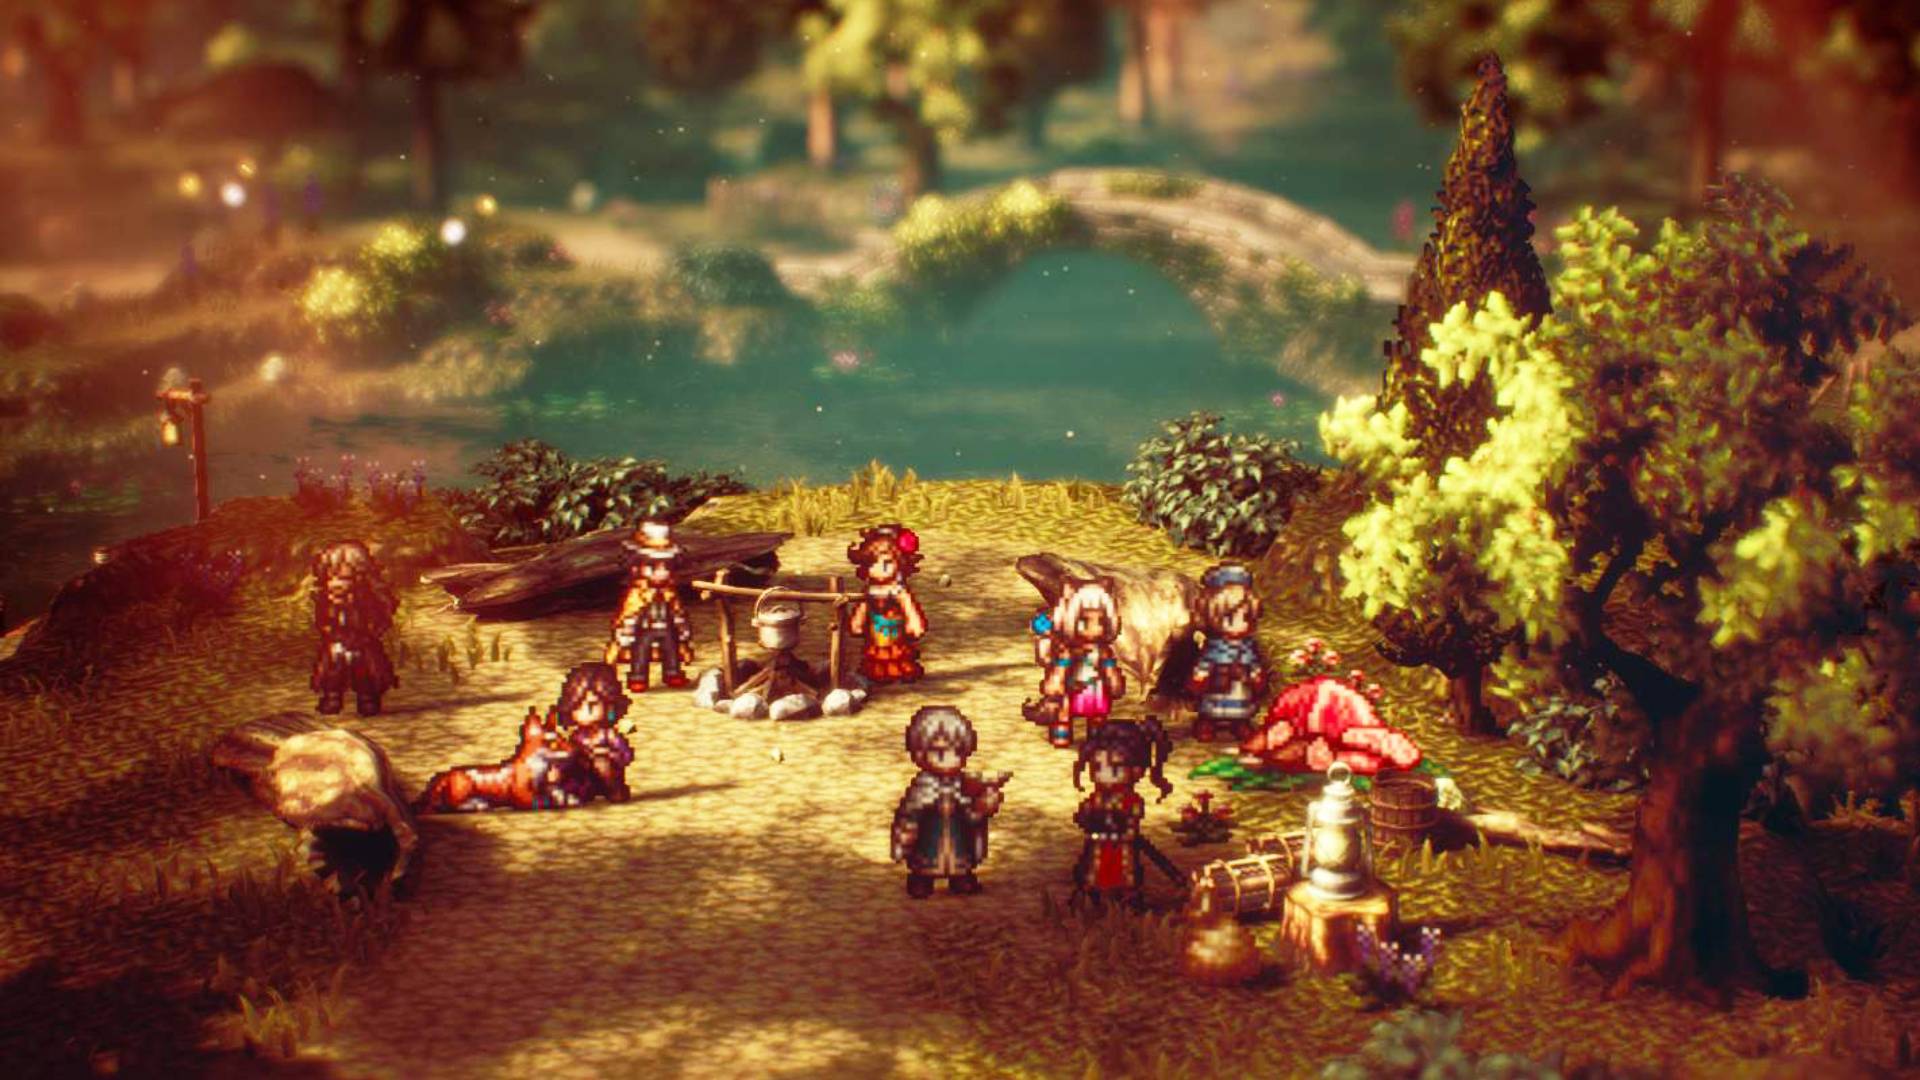 Octopath Traveler 2: A Mysterious Box – Unveiling the Next Chapter in a Beloved Franchise